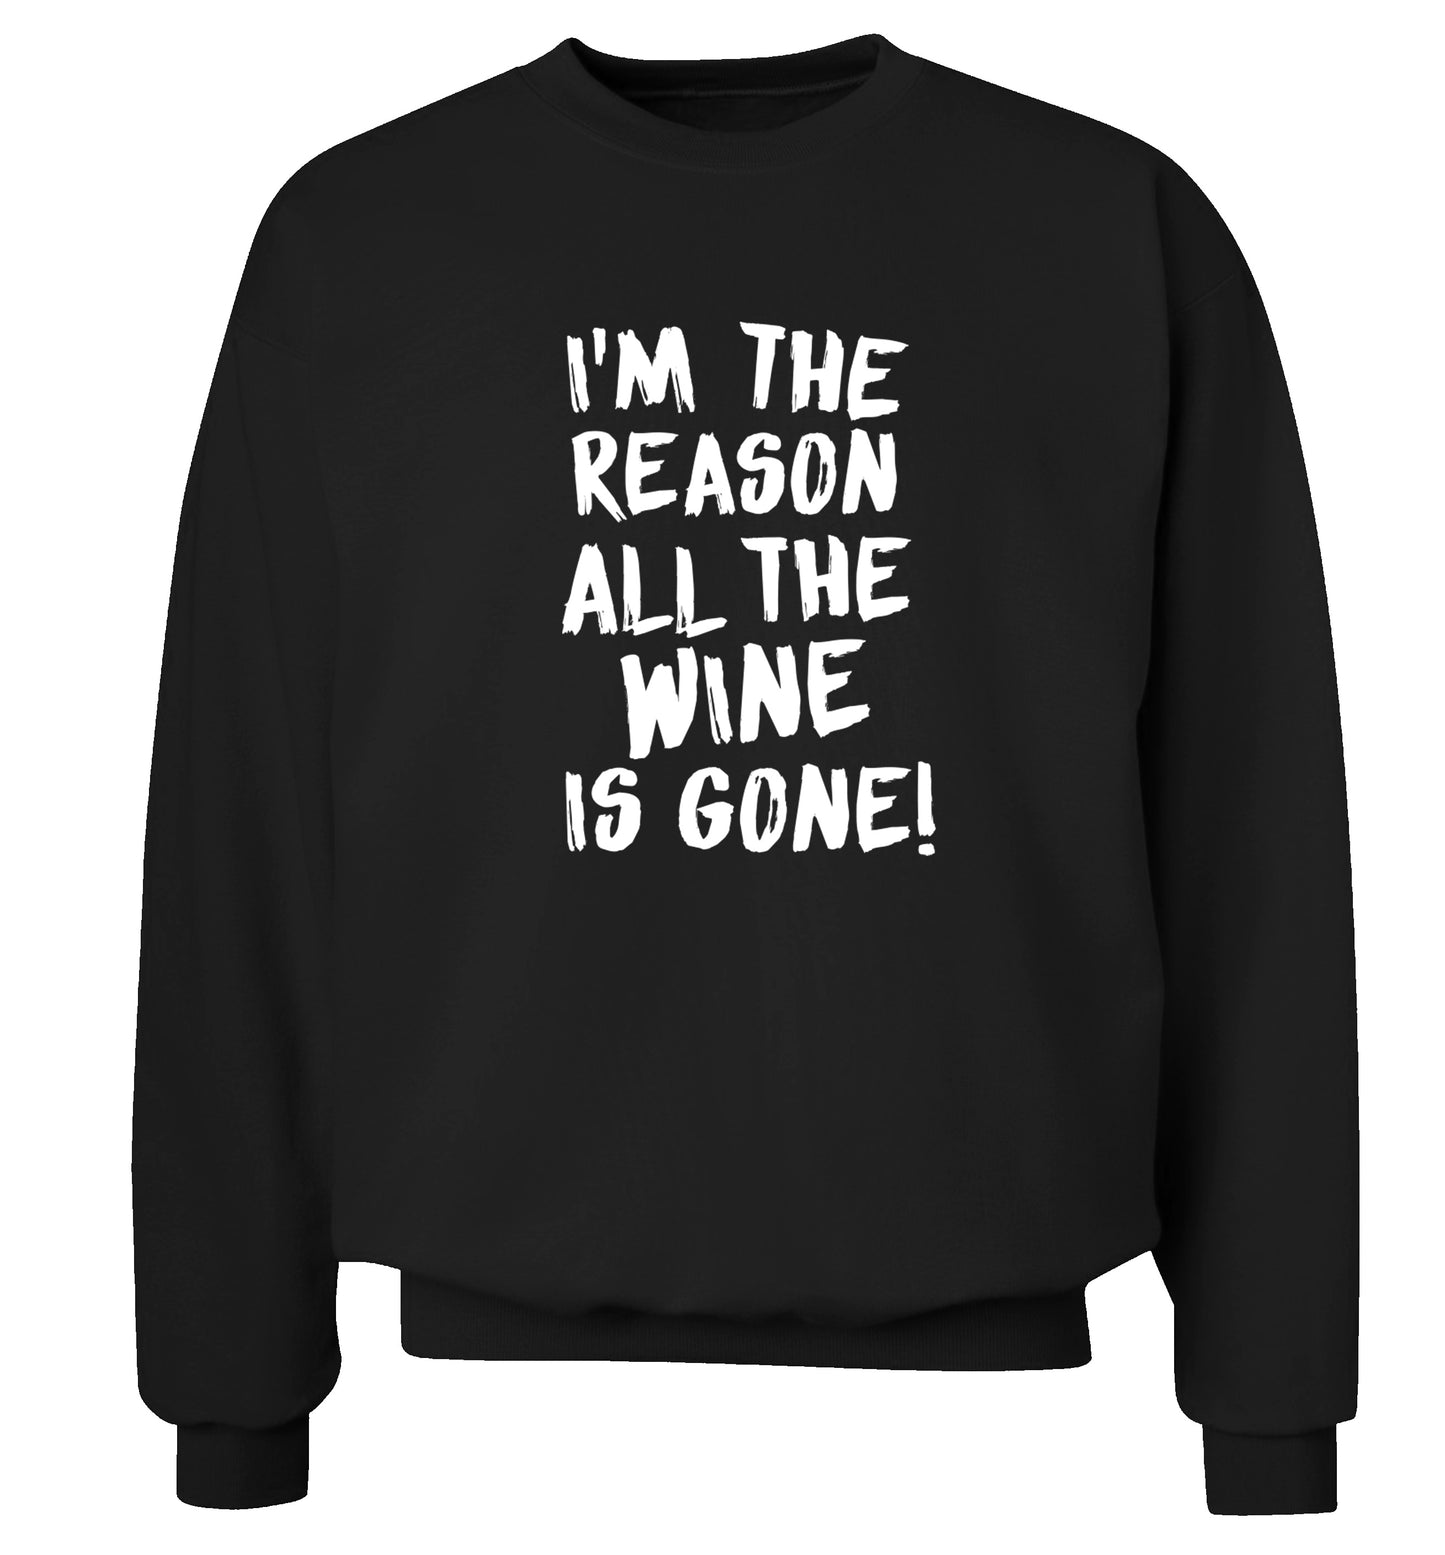 I'm the reason all the wine is gone Adult's unisex black Sweater 2XL